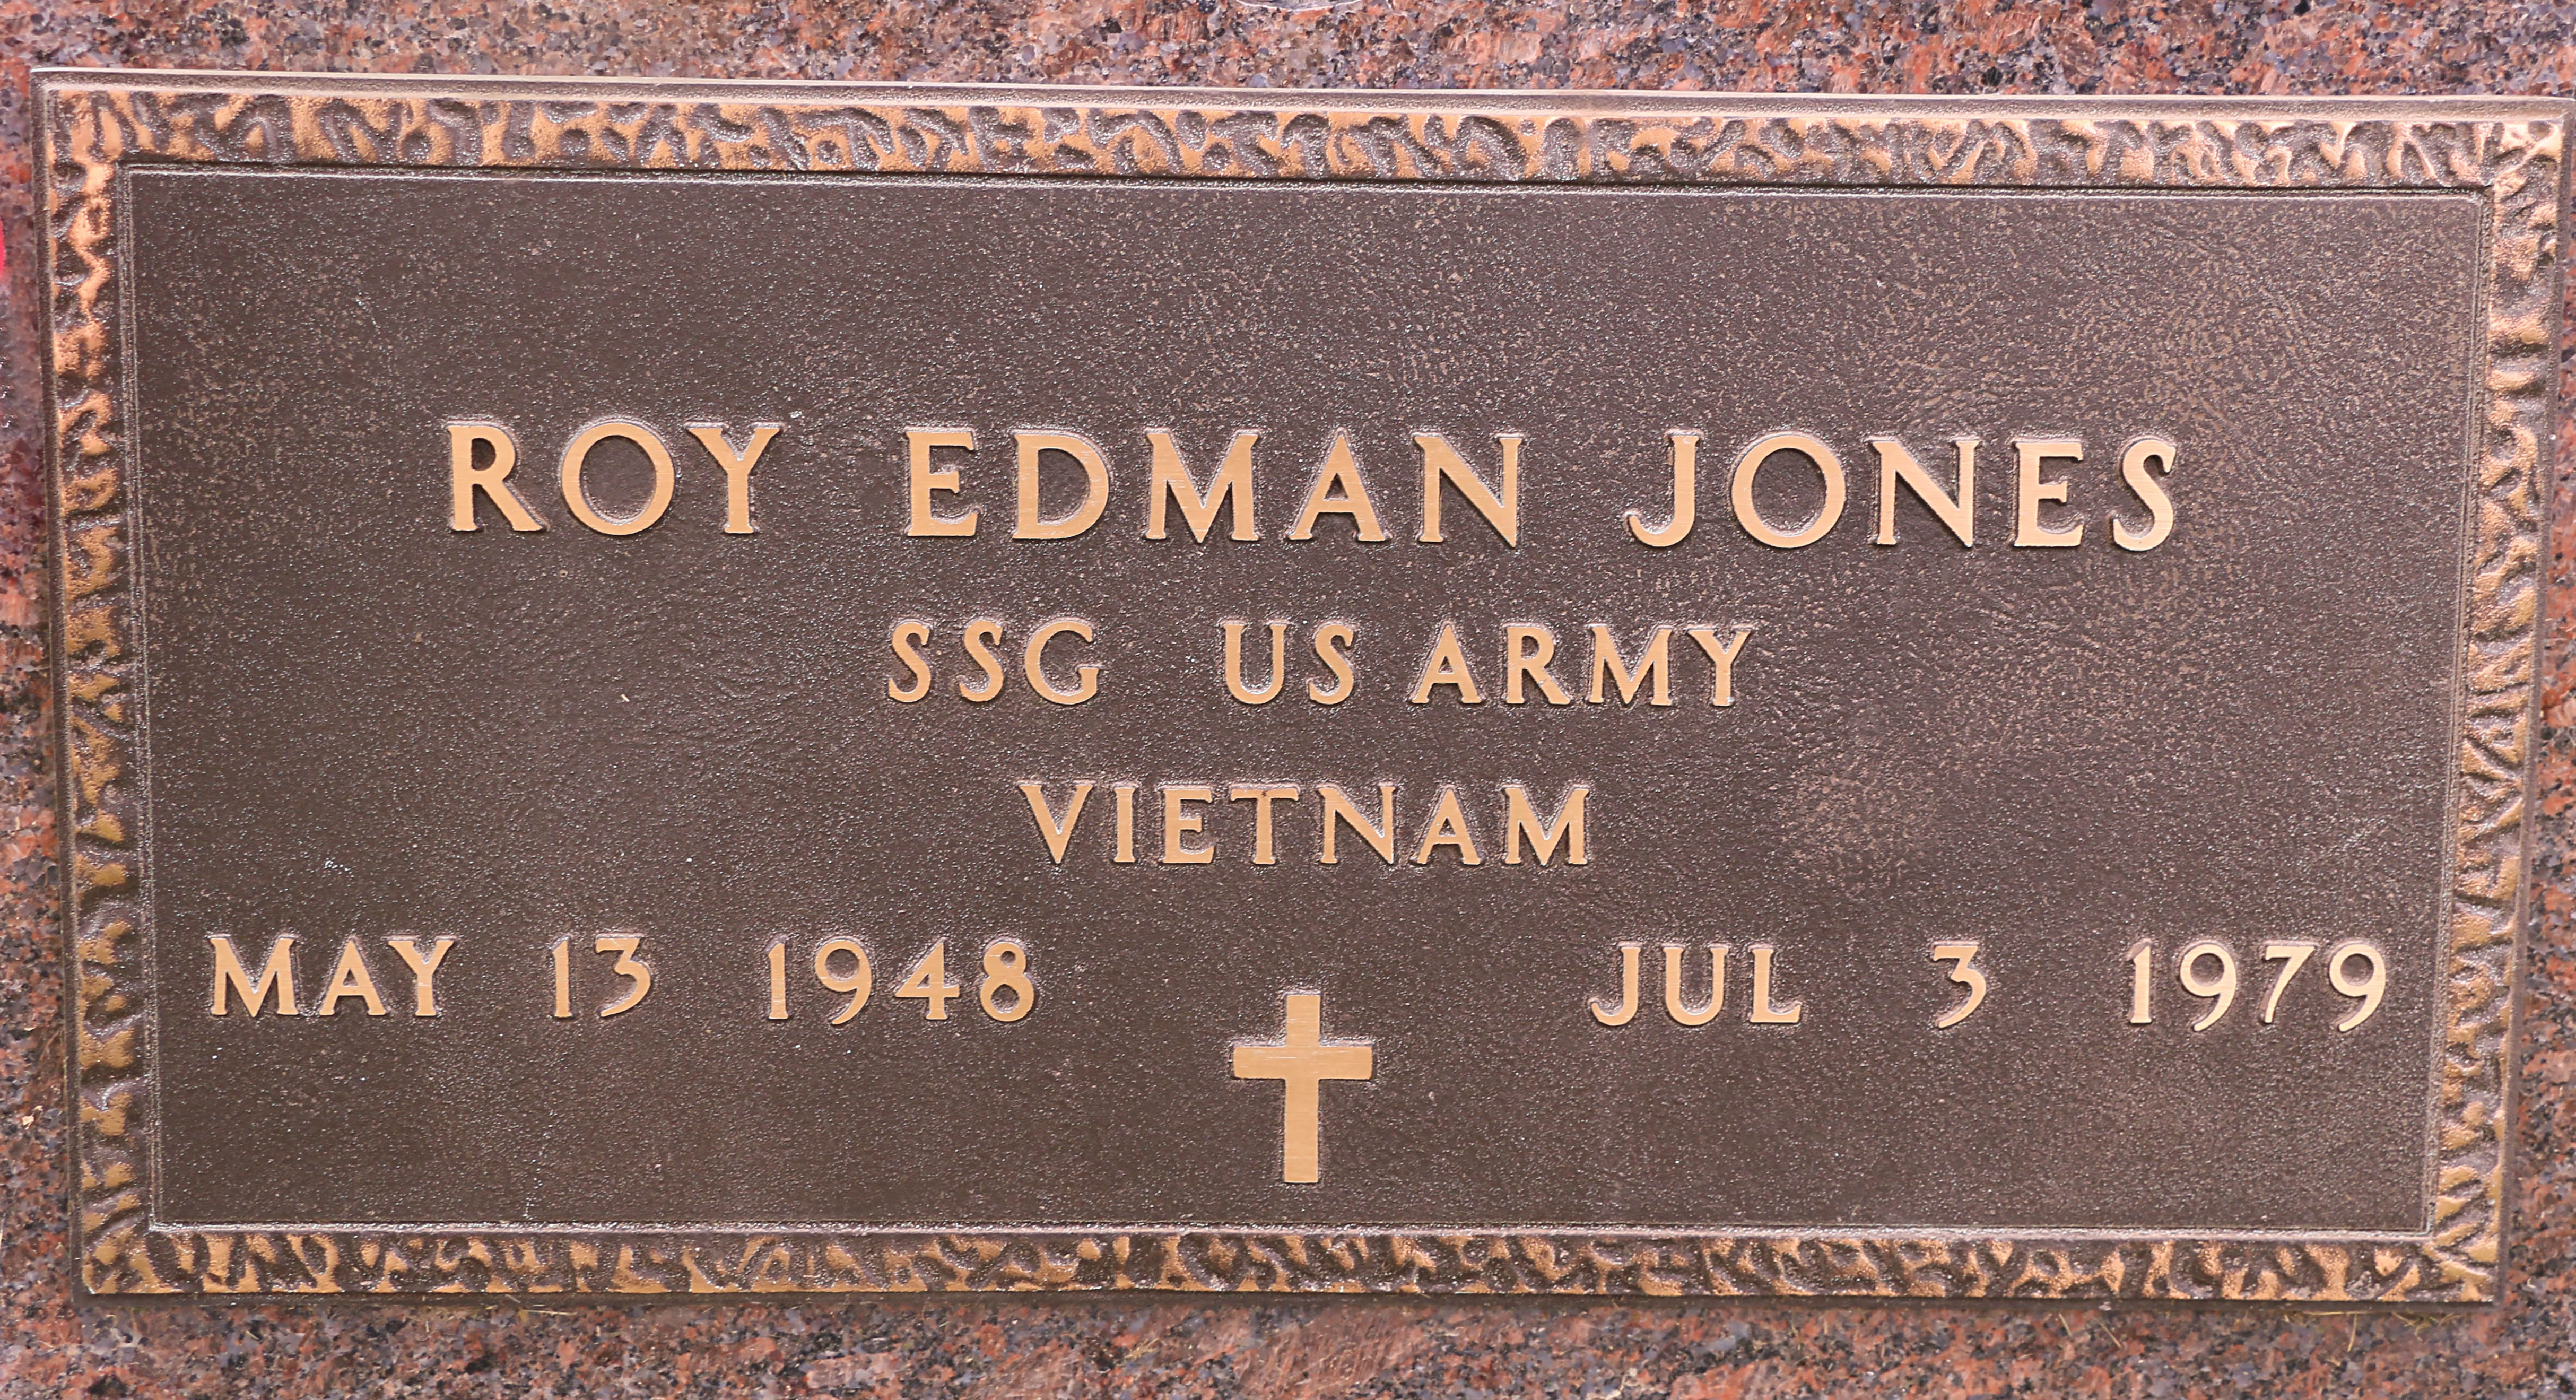 Headstone close-up - Military plaque